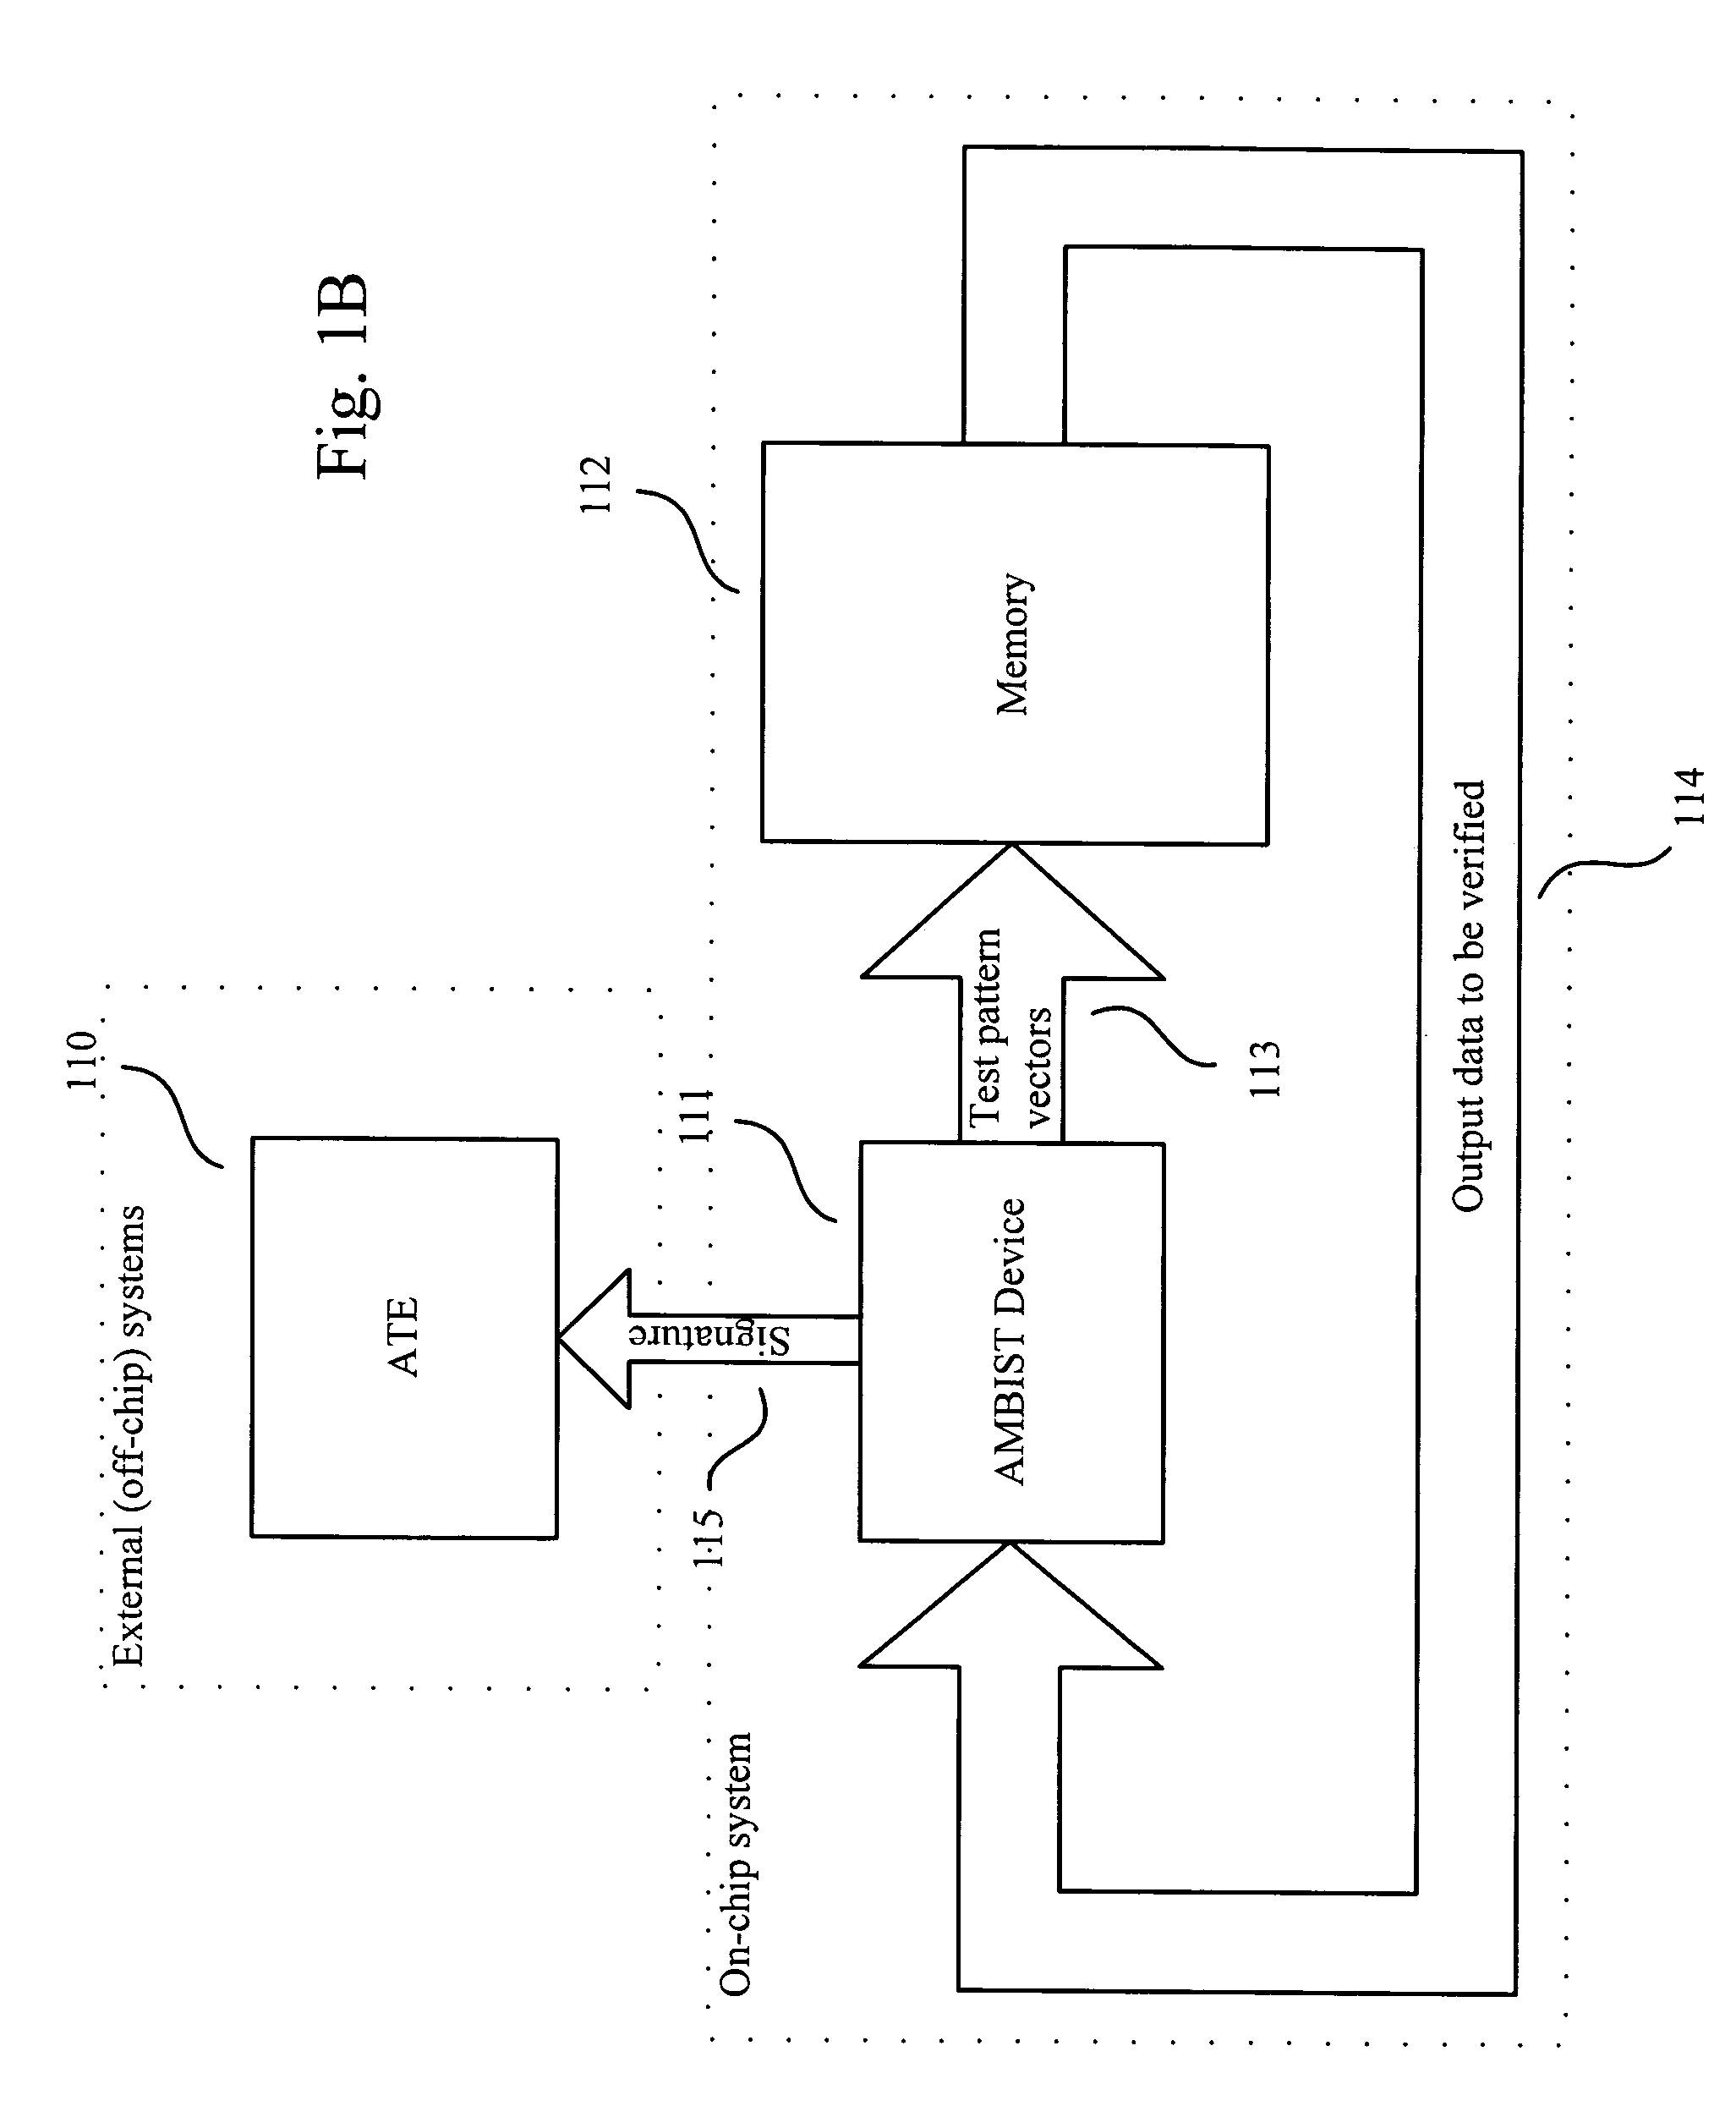 Method and system for testing memory using hash algorithm